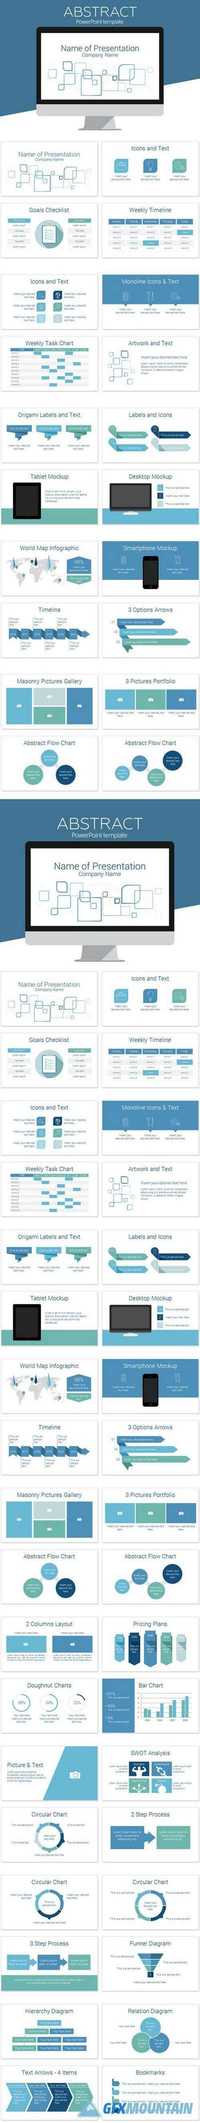 Abstract PowerPoint Template 621674